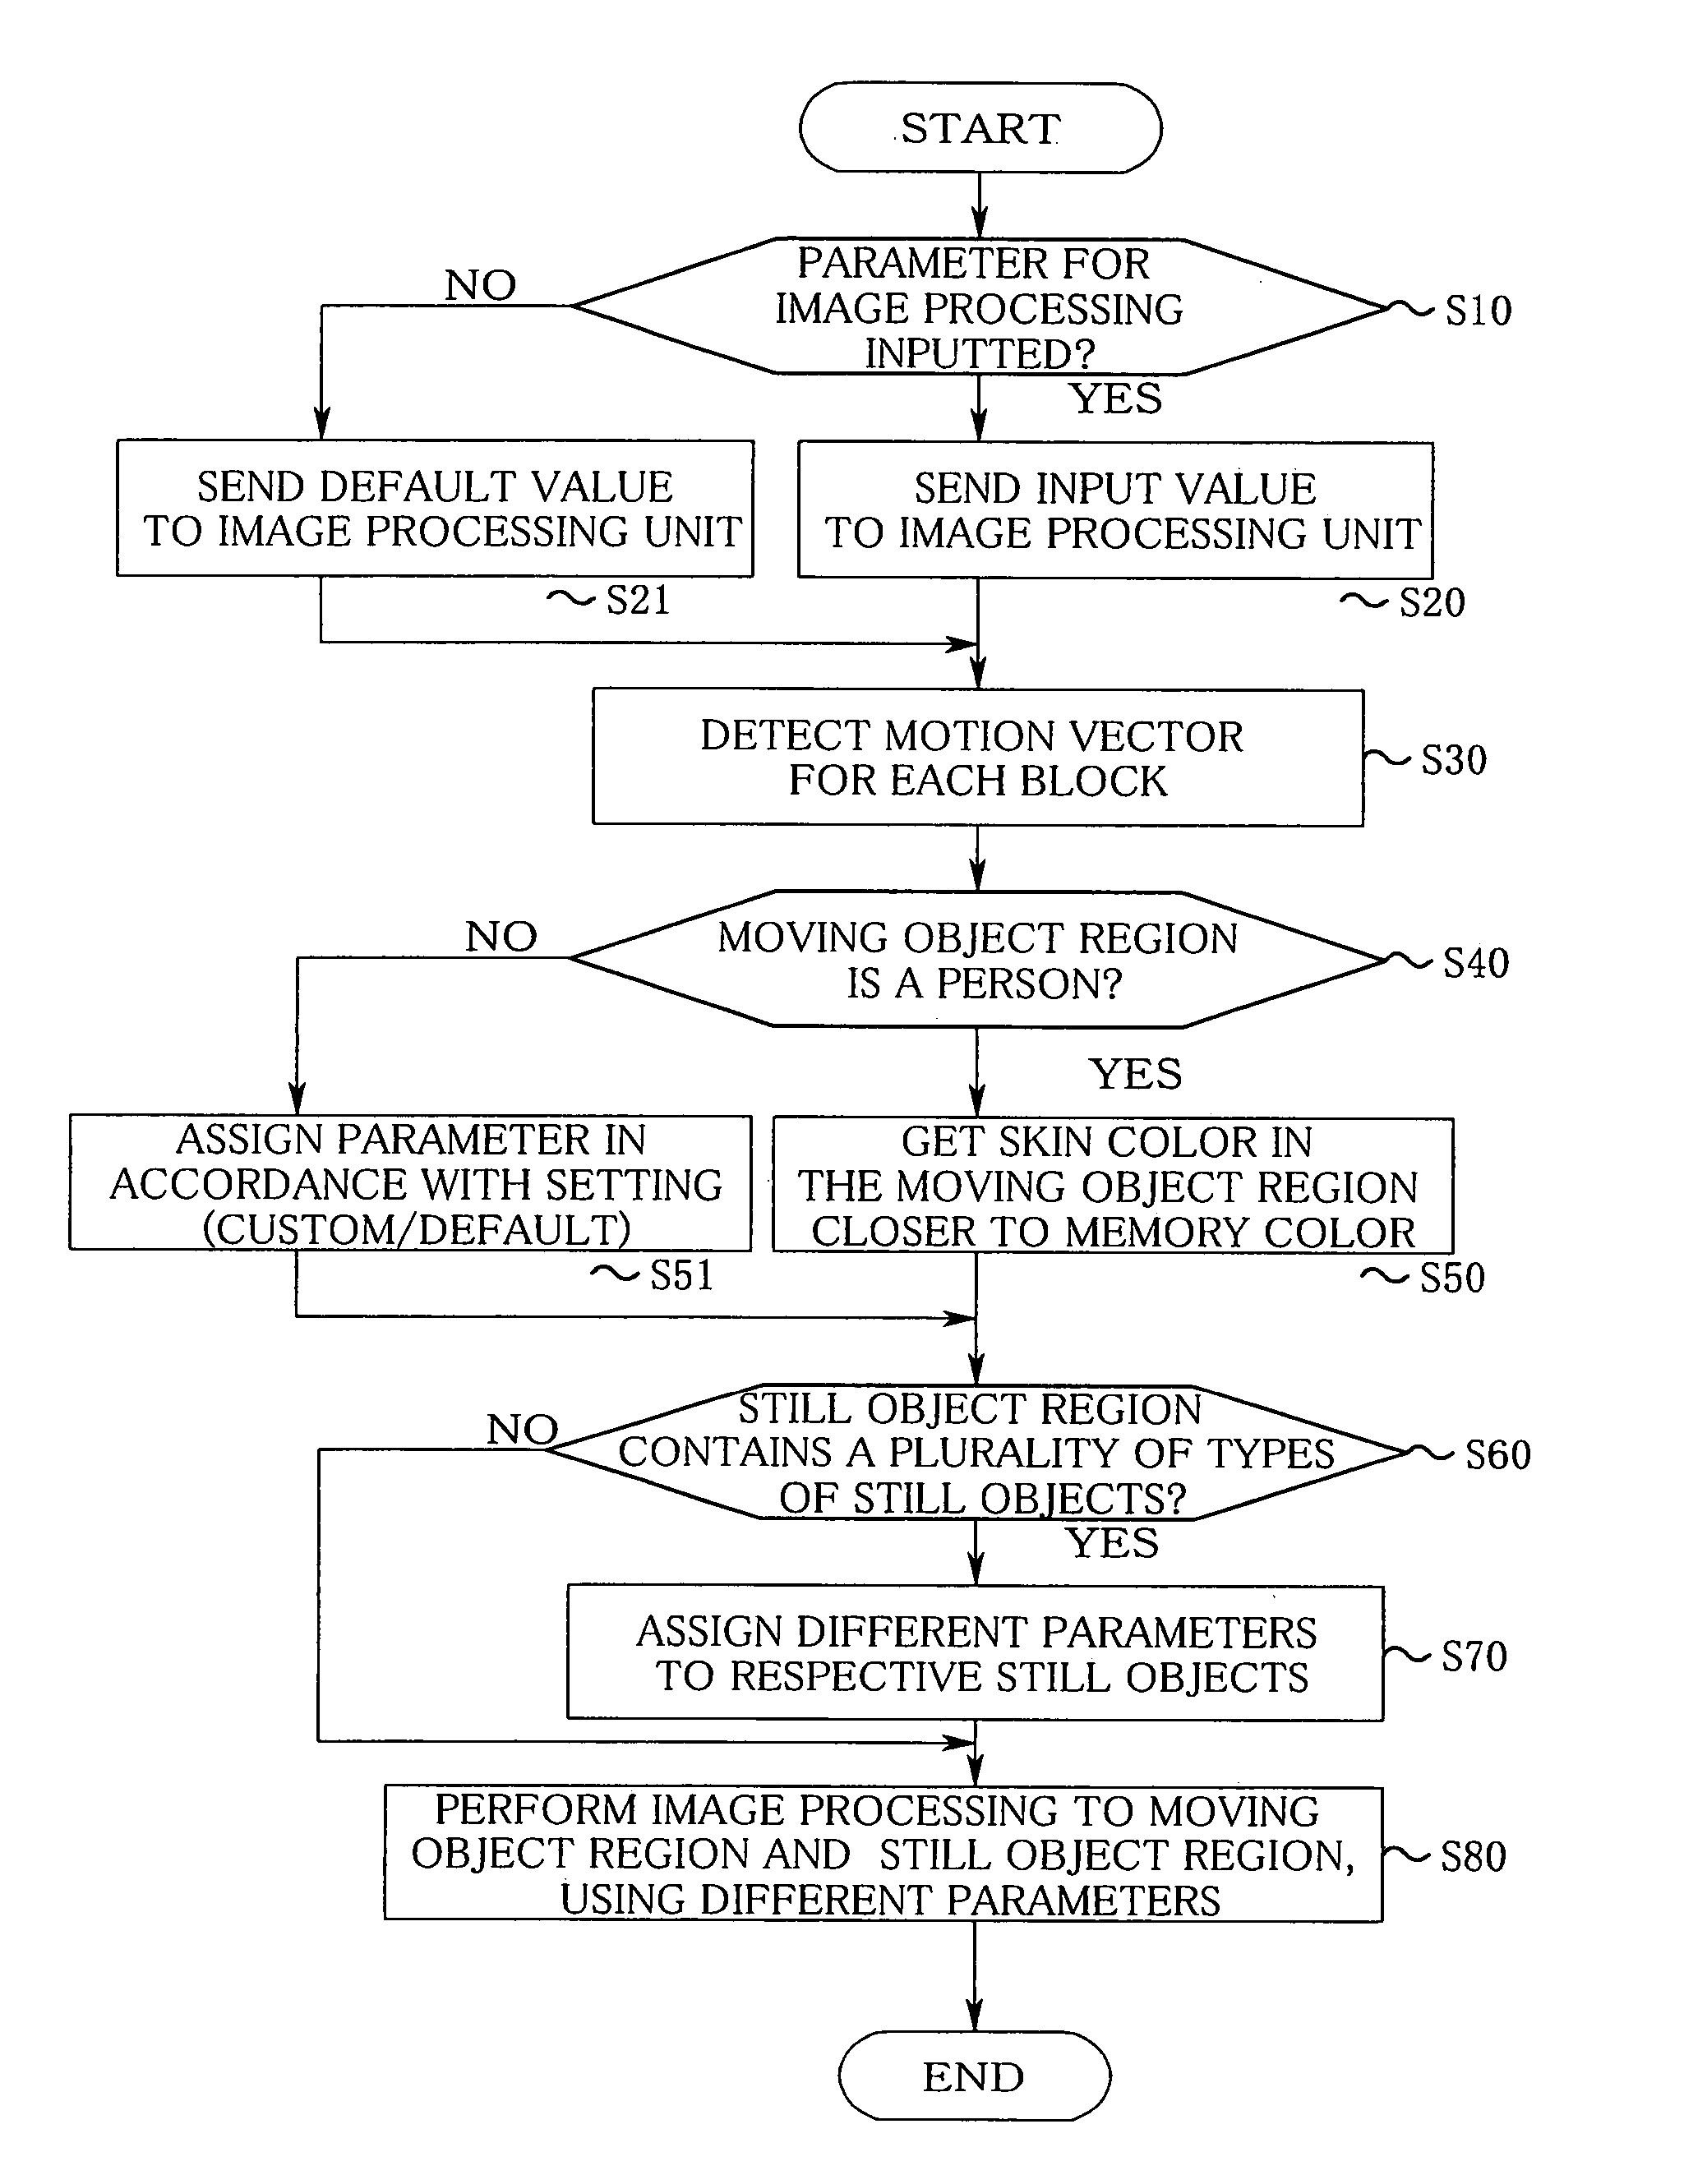 Moving image processing device and method for performing different image processings to moving object region and still object region